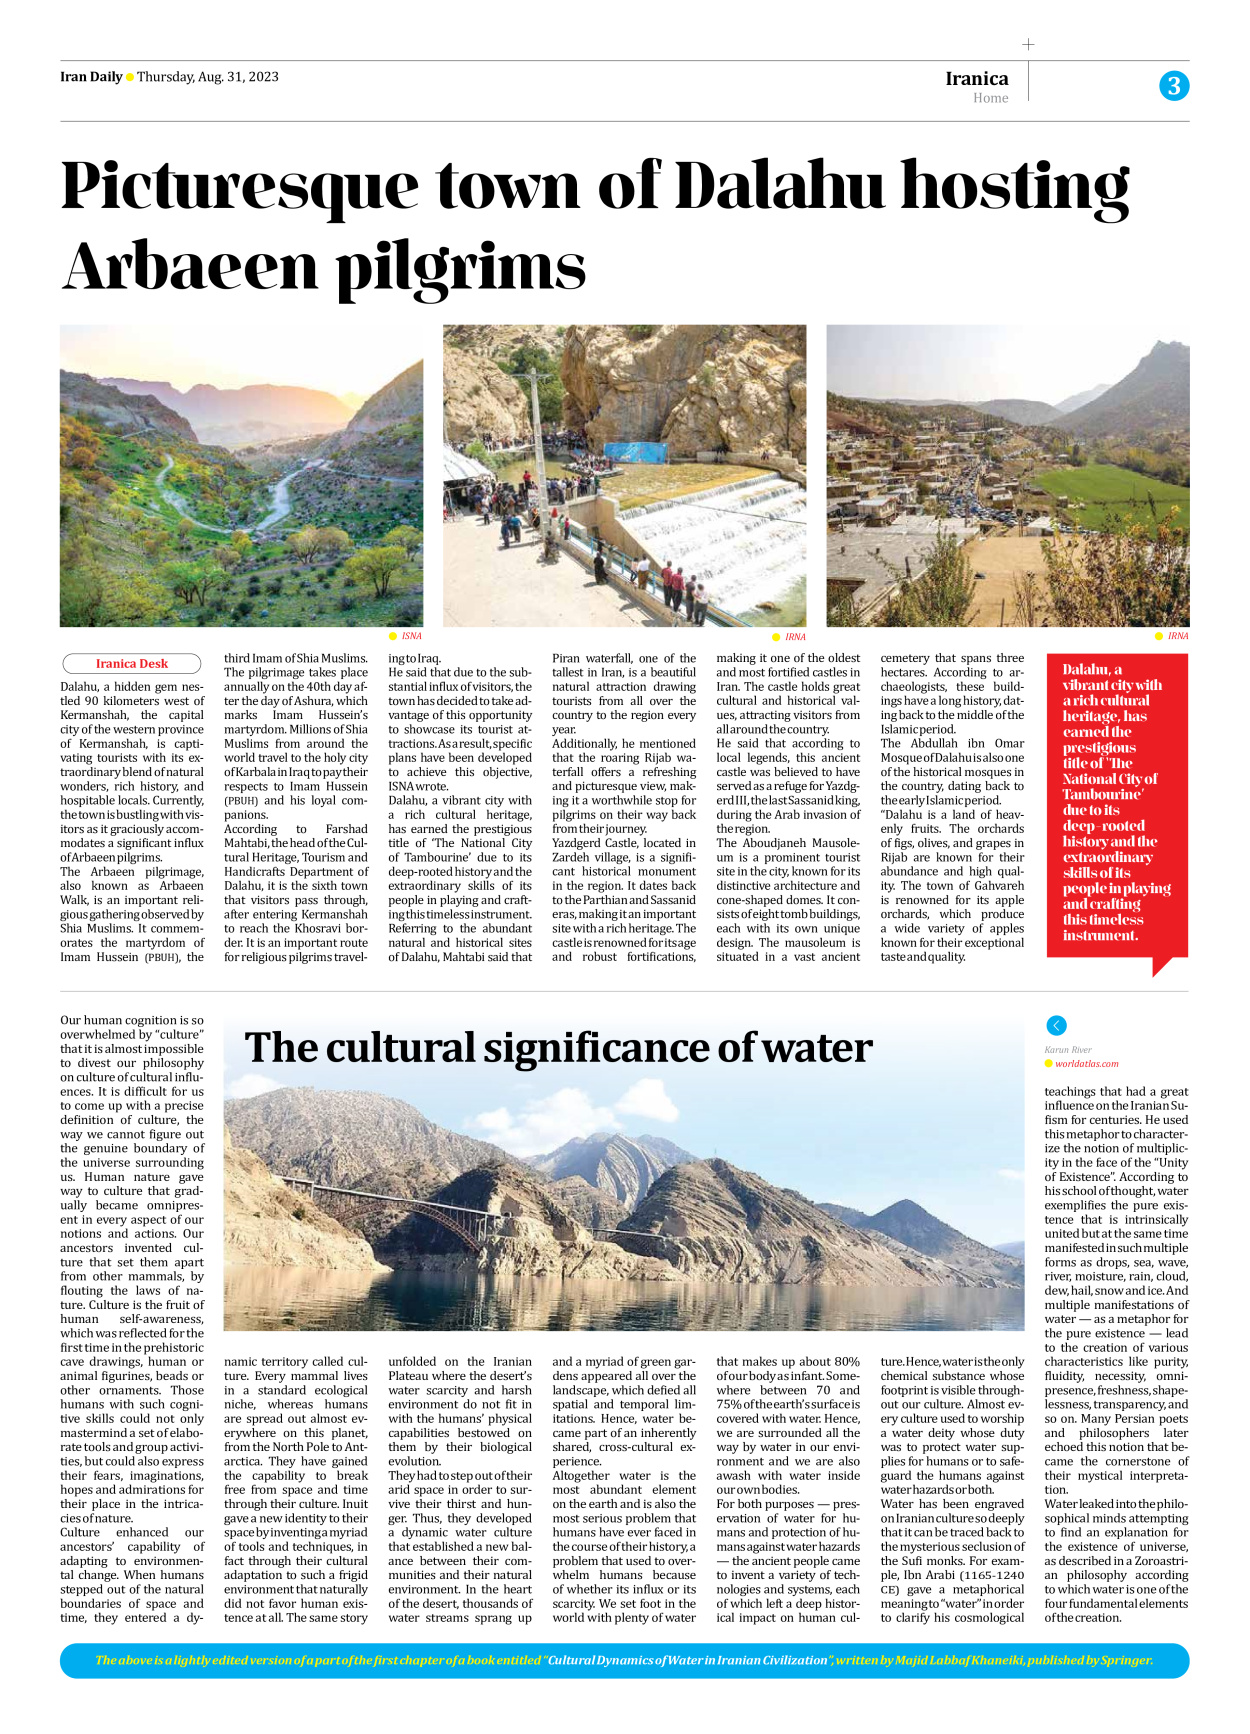 Iran Daily - Number Seven Thousand Three Hundred and Seventy Seven - 31 August 2023 - Page 3